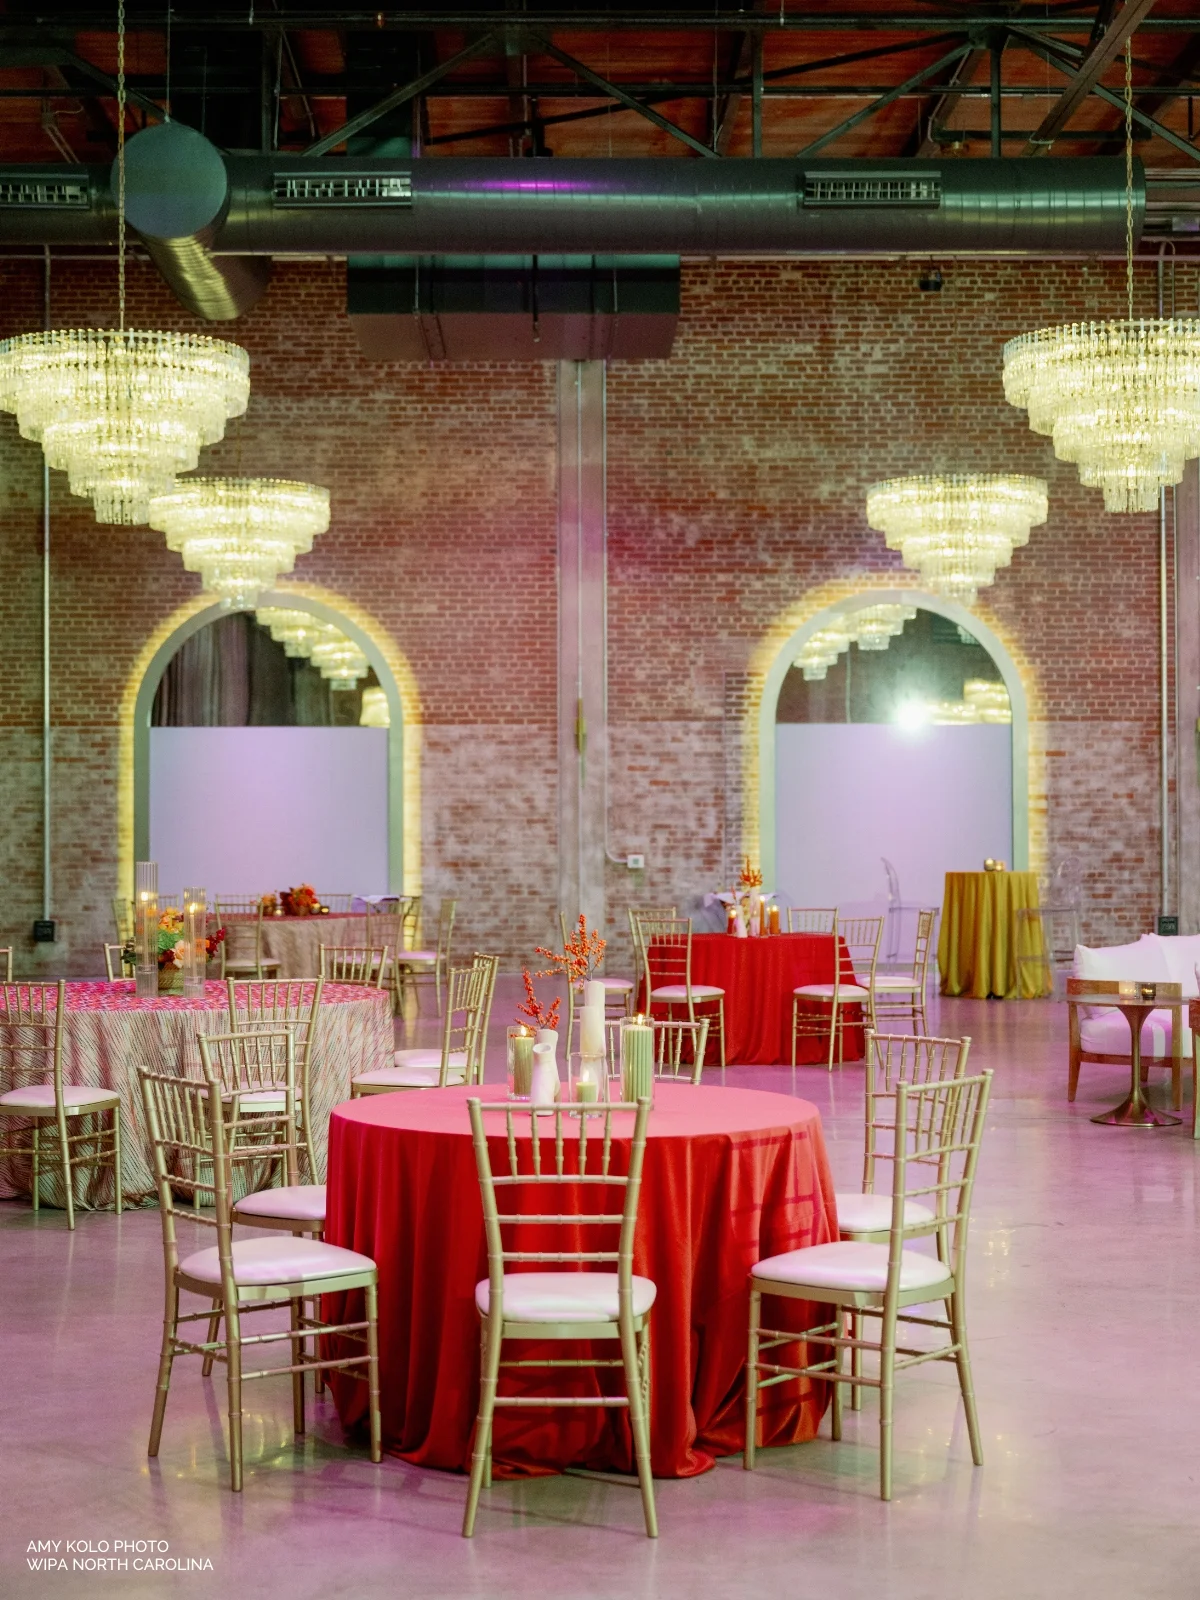 A decorated event space features round tables with red tablecloths, gold chairs, and elegant chandeliers hanging from the ceiling. Brick walls with large arched mirrors are in the background.